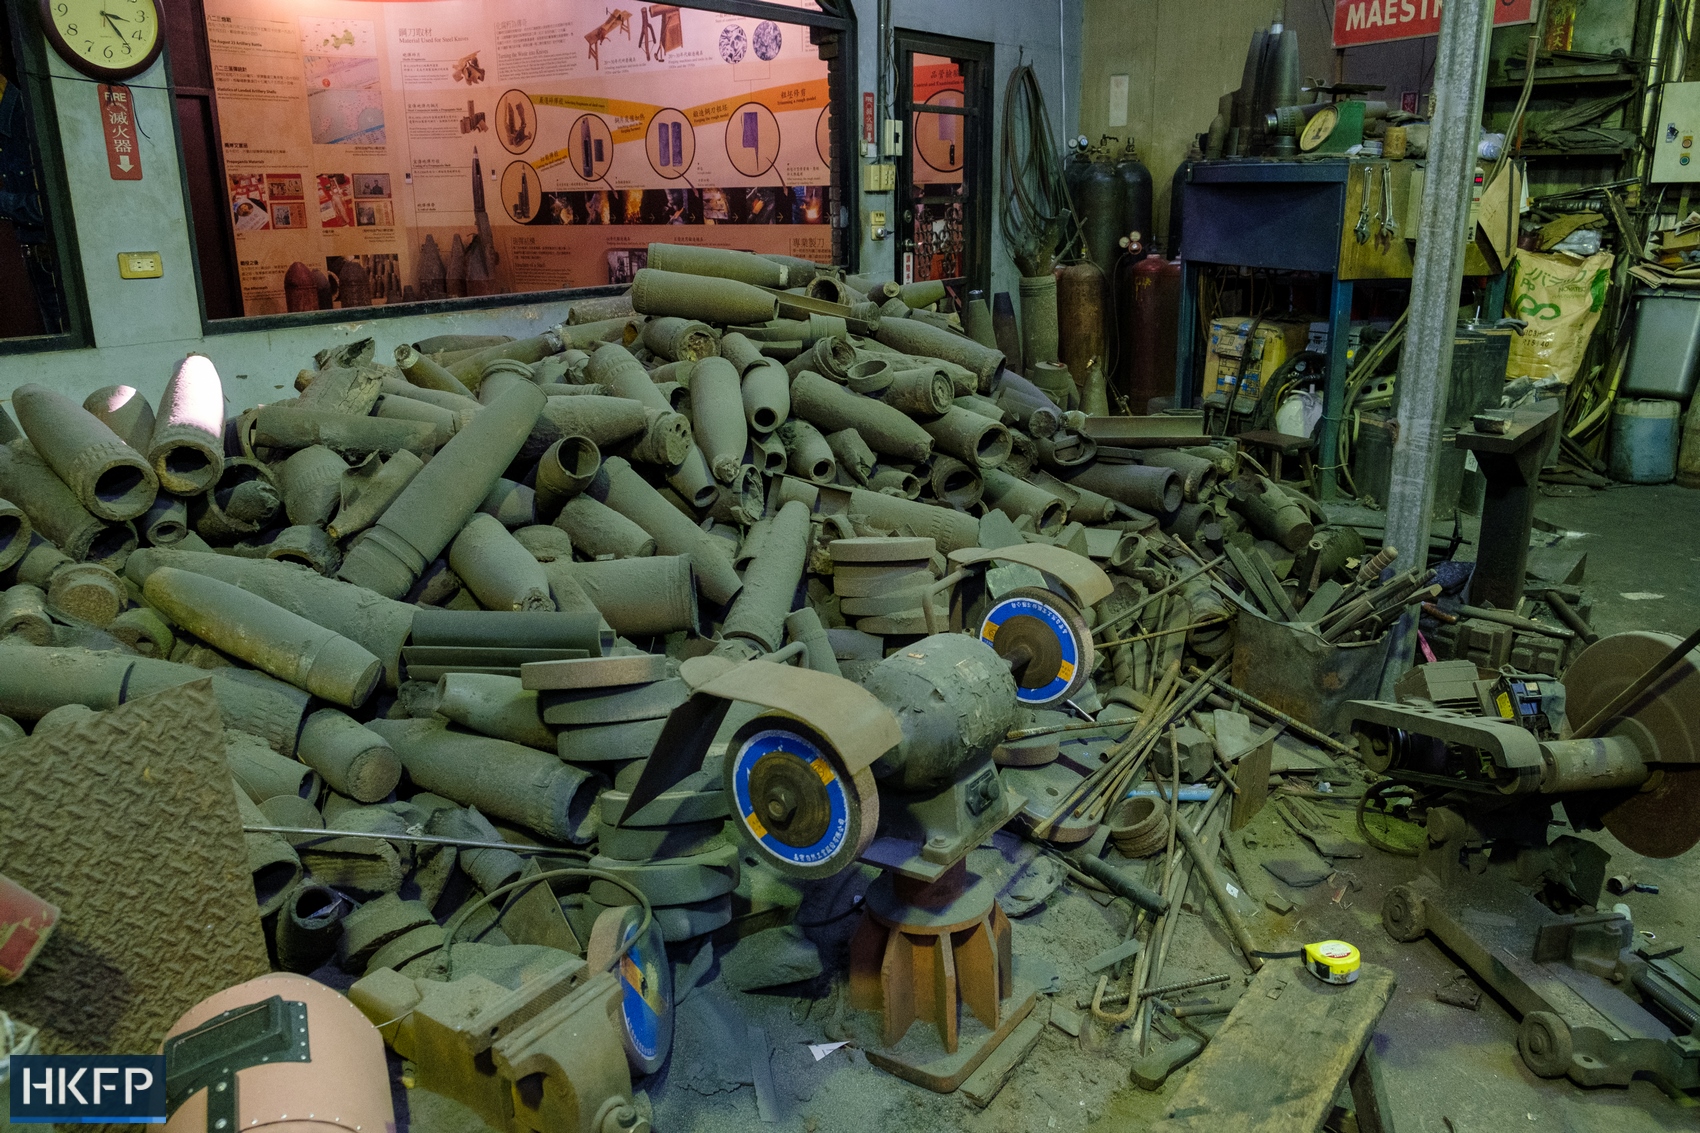 A stock of old chinese artillery shell at Maestro Wu's knives factory in Kinmen, Taiwan. November 20, 2021. Photo: Walid Berrazeg/HKFP.